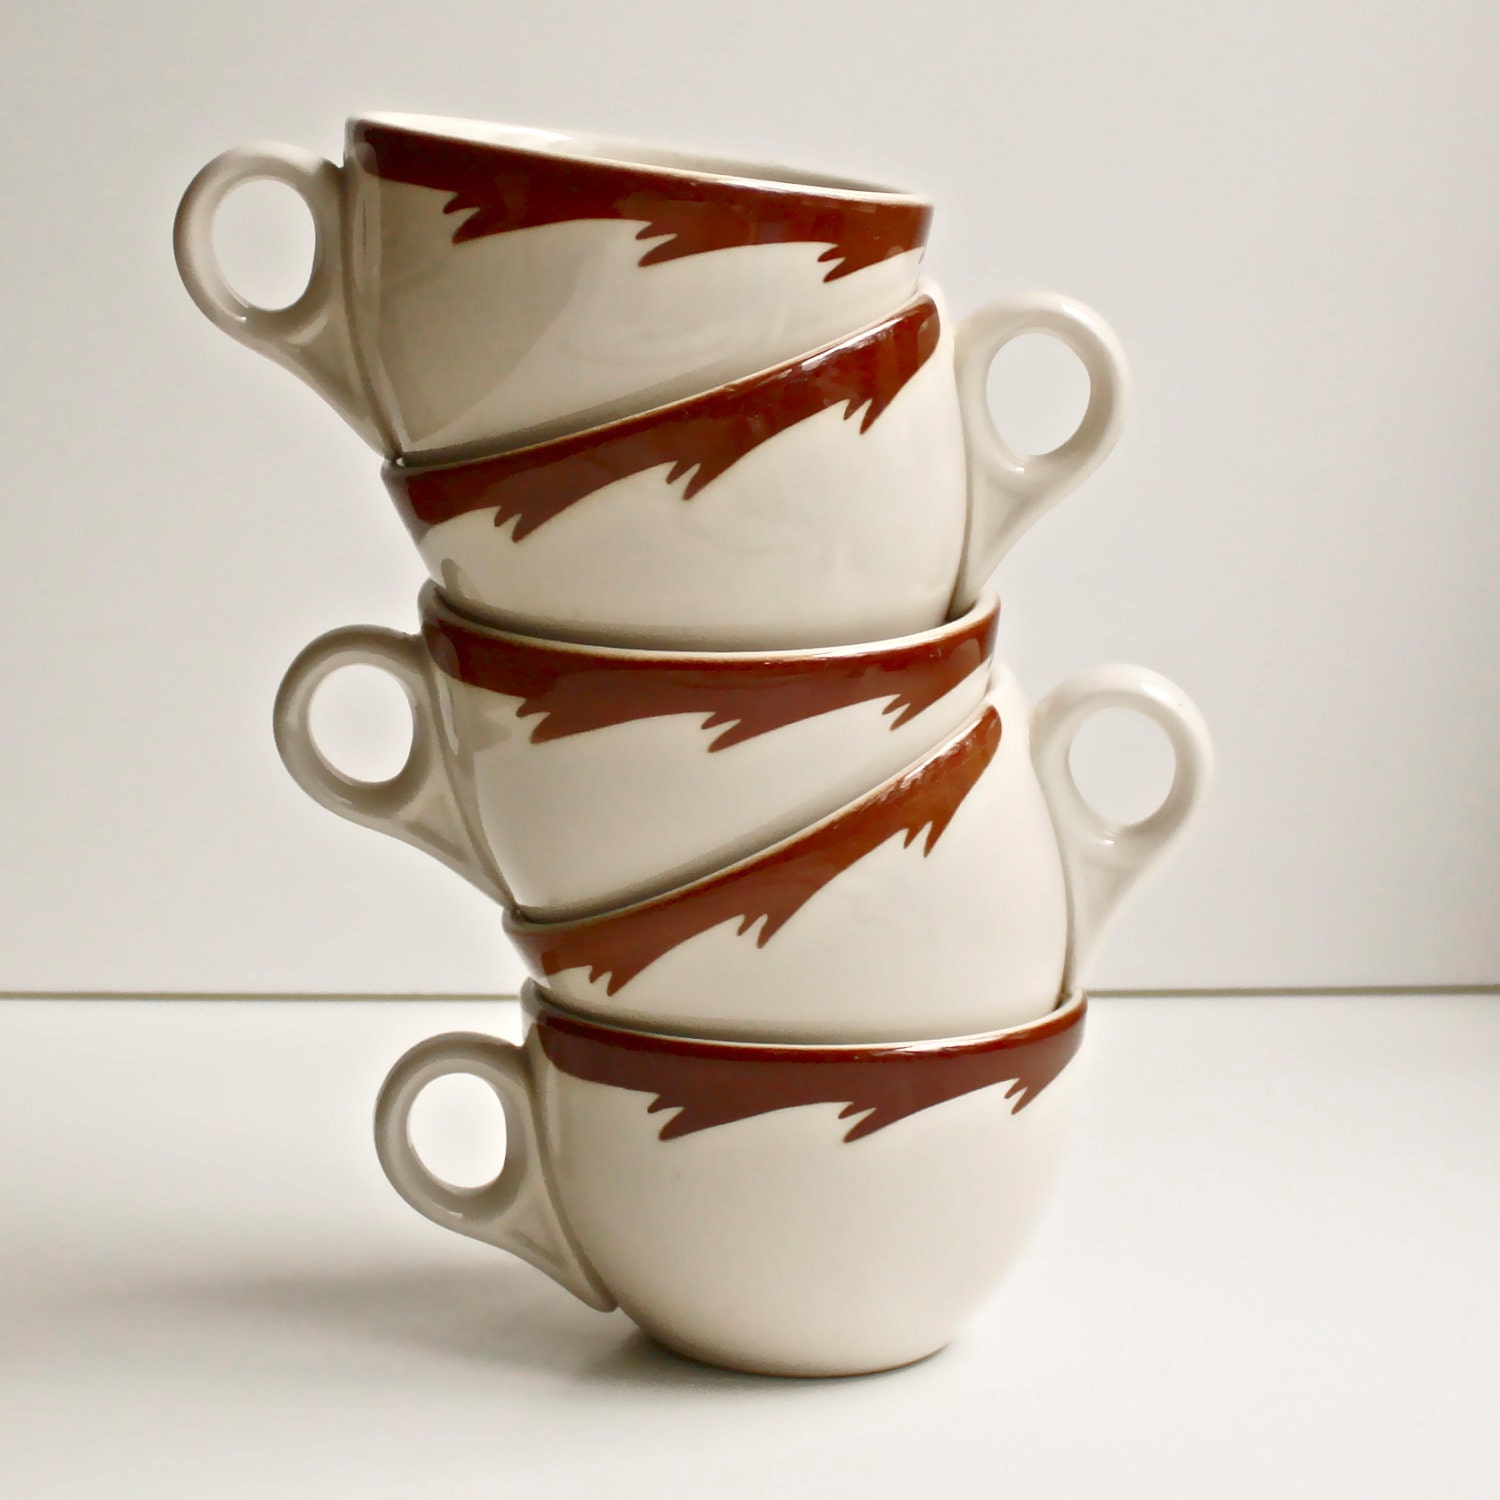 Vintage Restaurant Ware Coffee Cups by KitchenTableVintage on Etsy